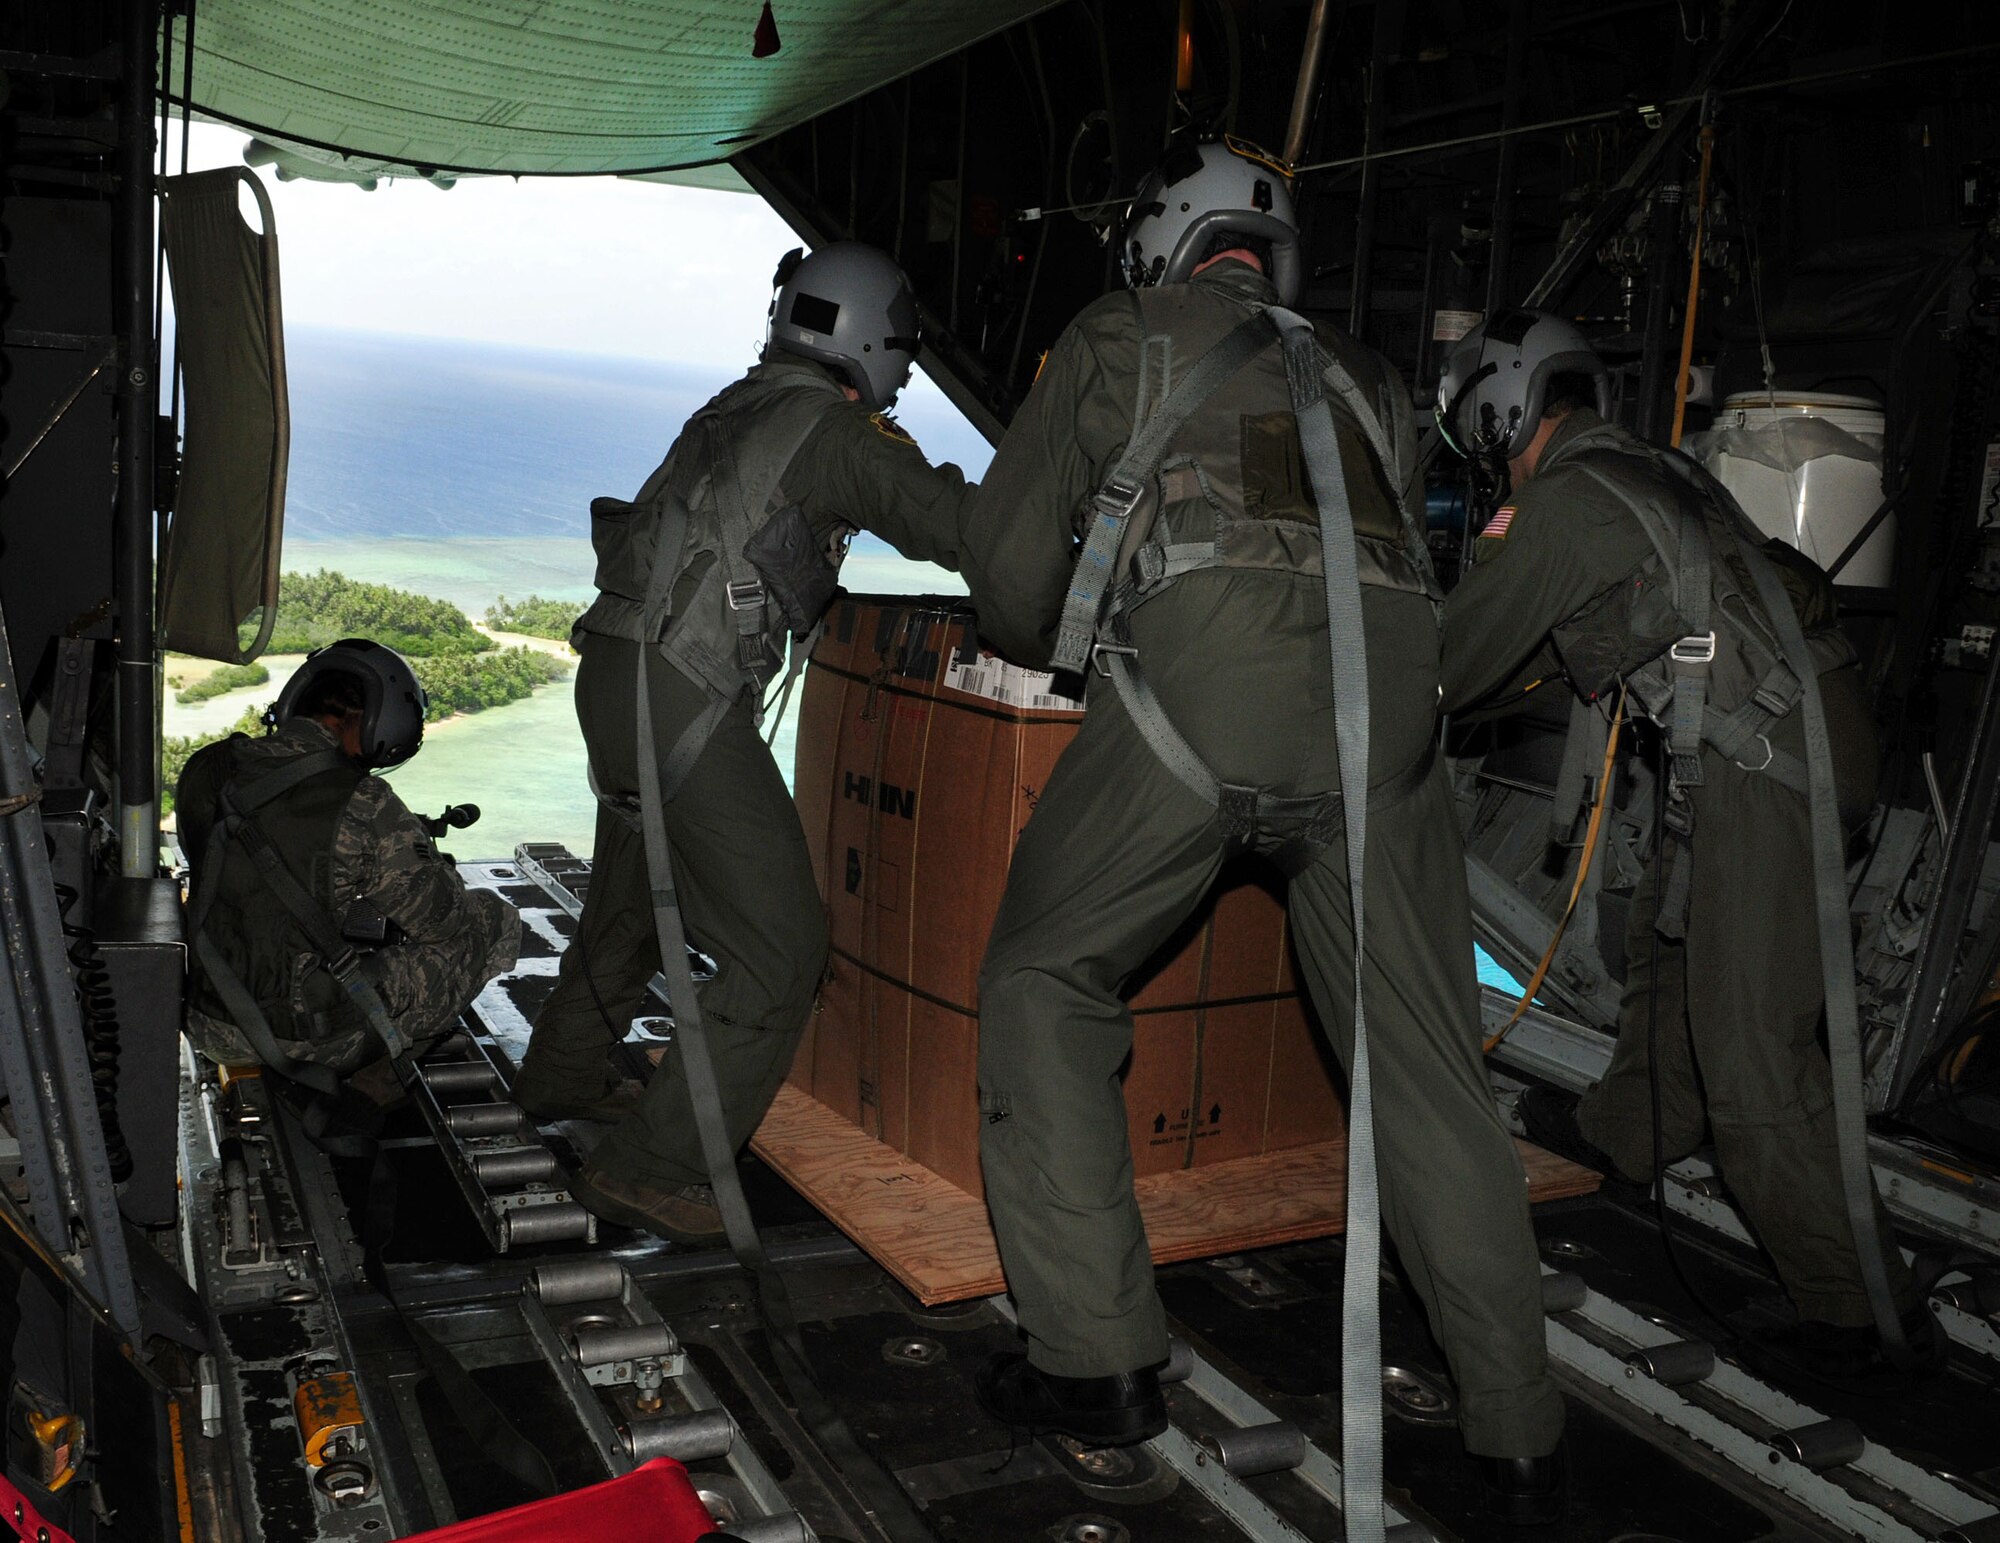 ANDERSEN AIR FORCE BASE, Guam - Airman from the 36th Airlift Squadron, Yokota Air Base, Japan, prepare to drop a package over a remote island near Chuuk Dec. 17. Operation Christmas Drop is a non-profit organization powered by volunteers from Andersen Air Force Base and the local Guam community. Each year, the two join forces to aid over 30,000 islanders in Chuuk, Palau, Yap, Marshall Islands and Commonwealth of the Northern Mariana Islands. (U.S. Air Force photo by Airman 1st Class Courtney Witt)  